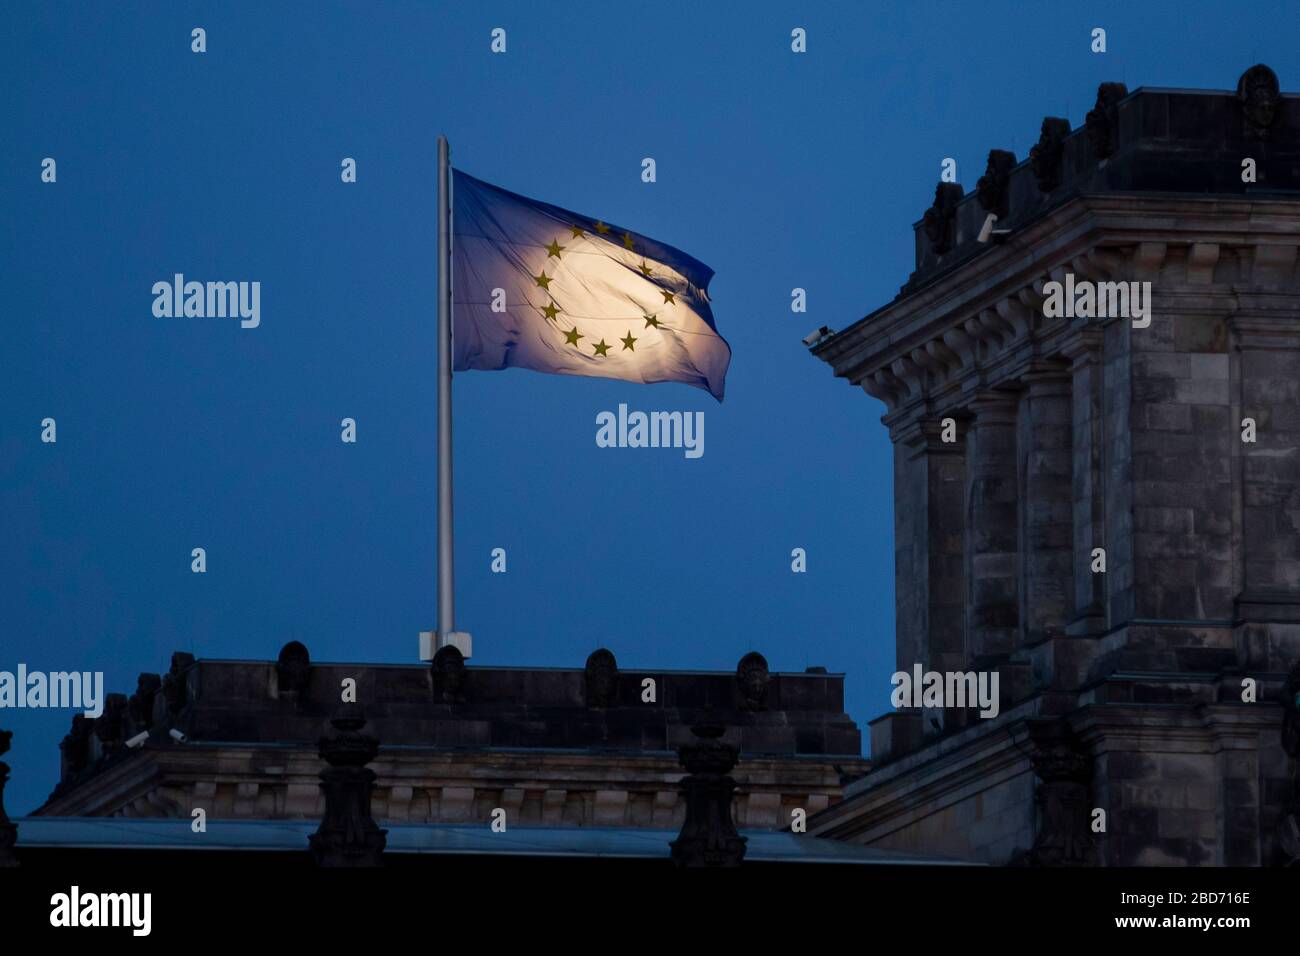 Berlin, Germany. 07th Apr, 2020. The moon rises as the so-called Supermond behind the EU flag on the Reichstag building. The moon reaches its perigee, i.e. the point closest to the Earth's orbit, on the night of 7-8 April as a full moon and therefore appears particularly large to the human observer. Credit: Christoph Soeder/dpa/Alamy Live News Stock Photo